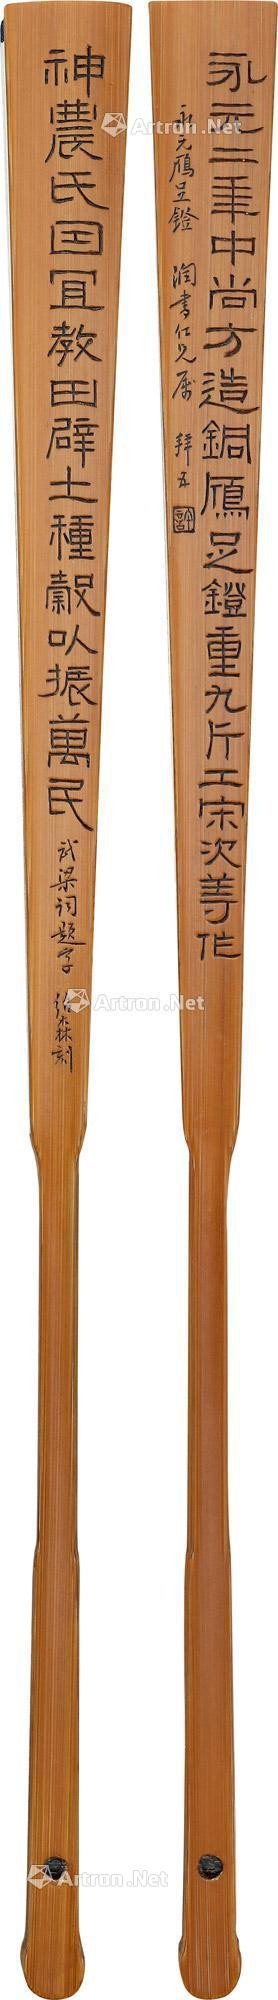 A BAMBOO CARVED ‘BRONZE INSCRIPTION AND CALLIGRAPHY IN OFFICIAL SCRIPT’ FAN RIB BY XU BAIWU AND SHAO SEN